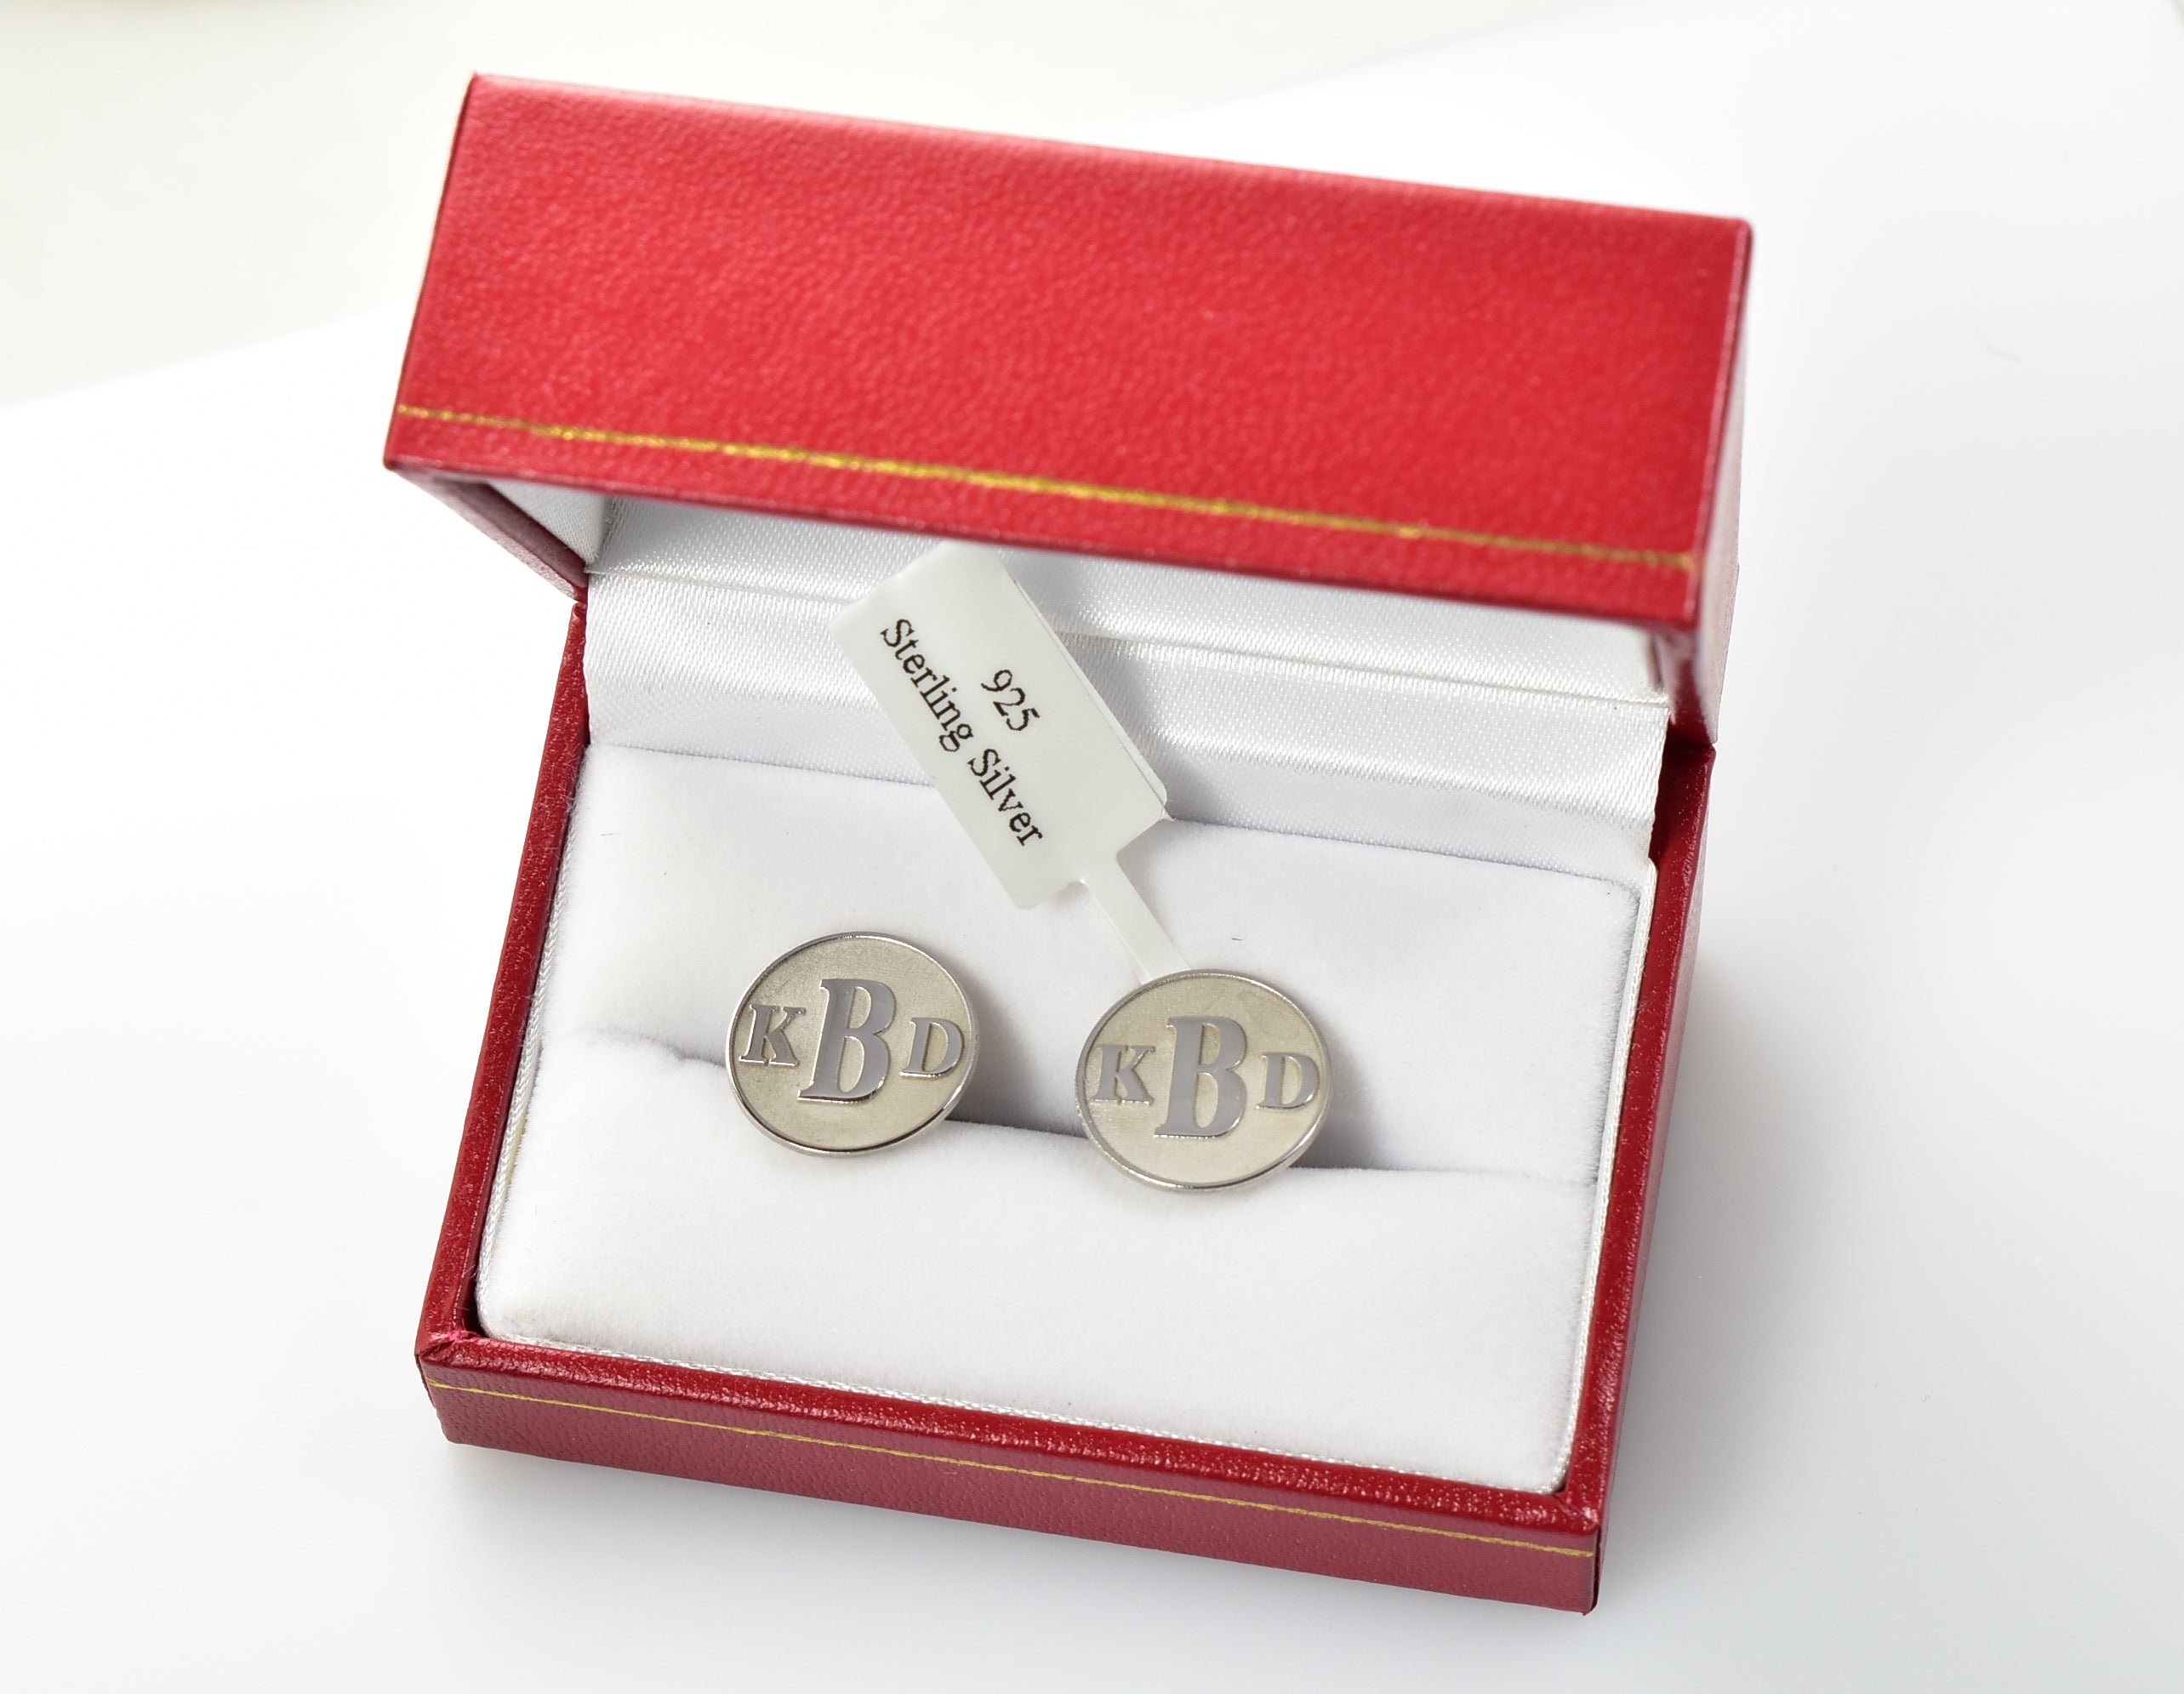 14K Yellow Gold 14K White Gold Sterling Silver Round Cufflinks Cuff Links Personalized Monogram